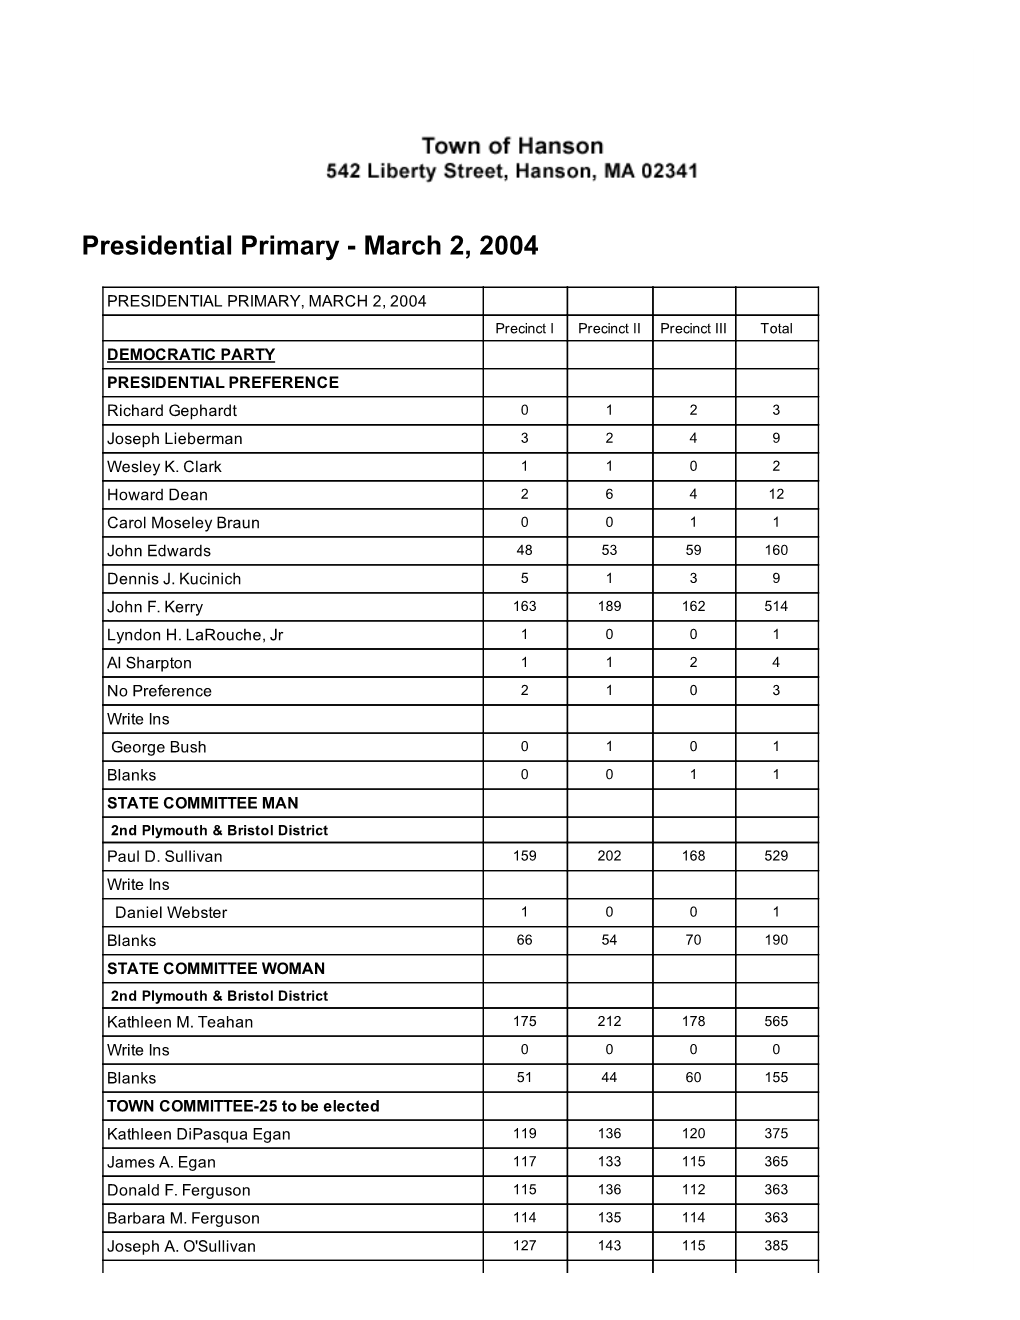 Presidential Primary ­ March 2, 2004